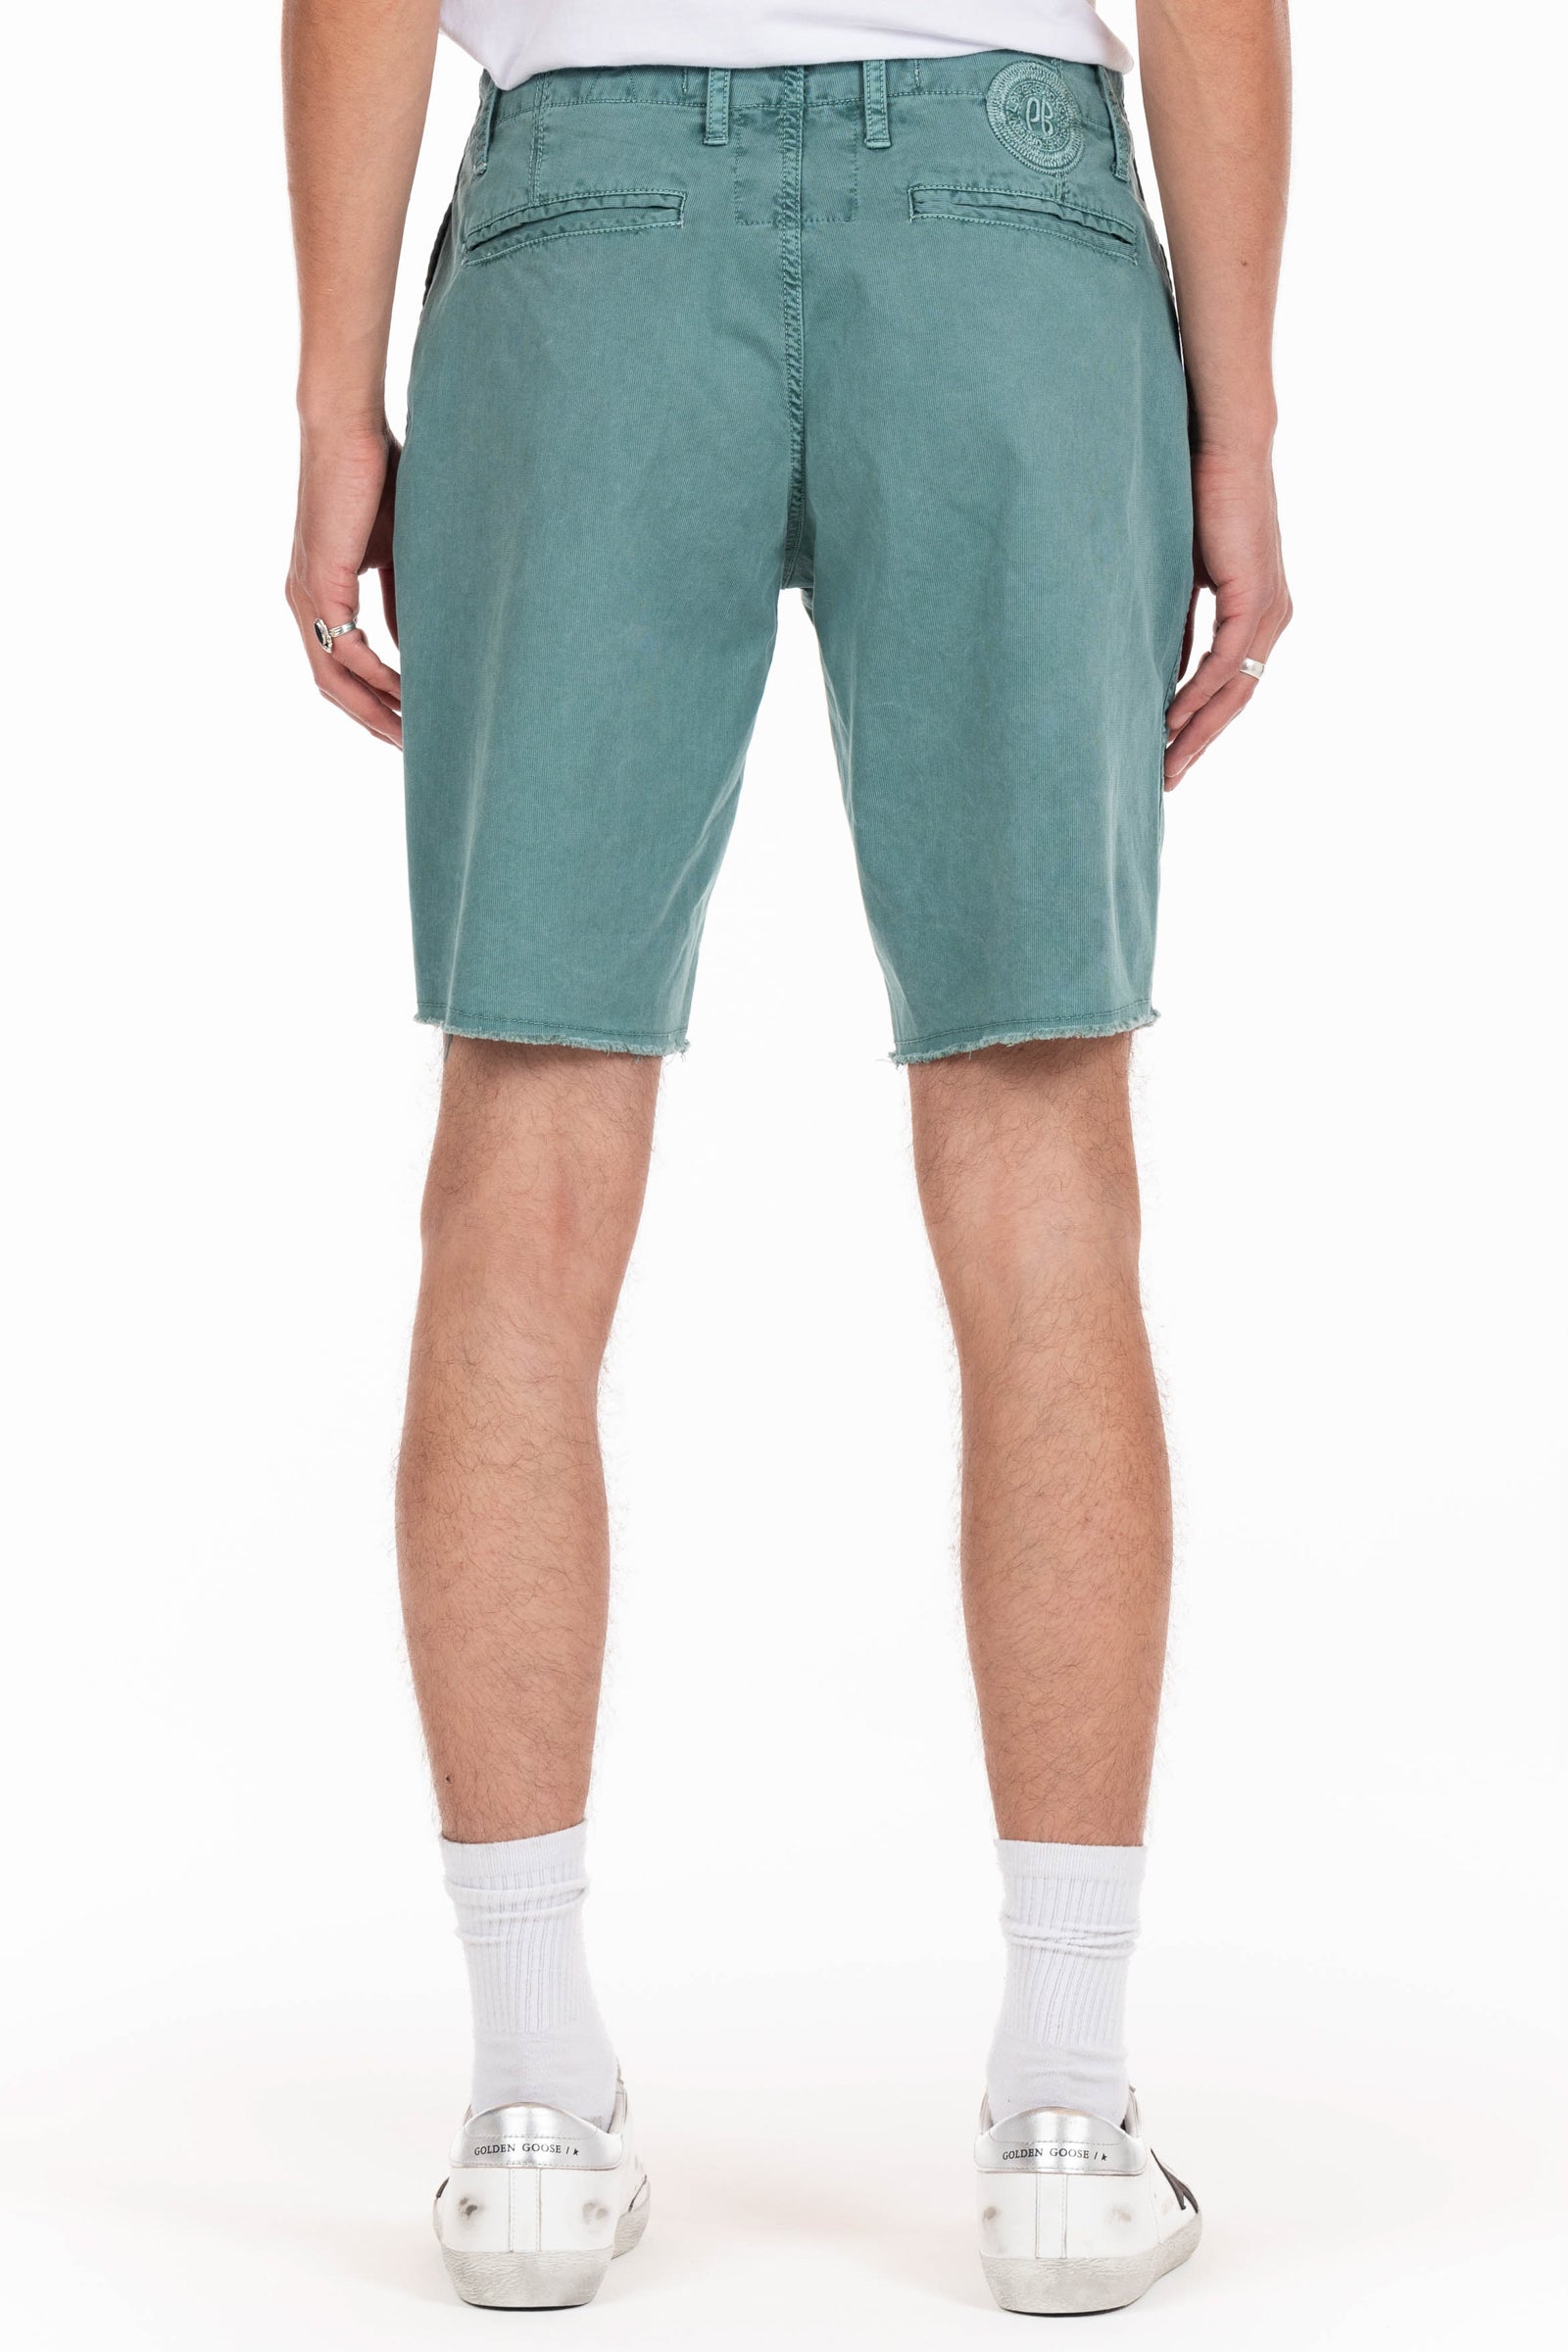 Original Paperbacks Rockland Chino Short in Breakwater on Model Cropped Back View